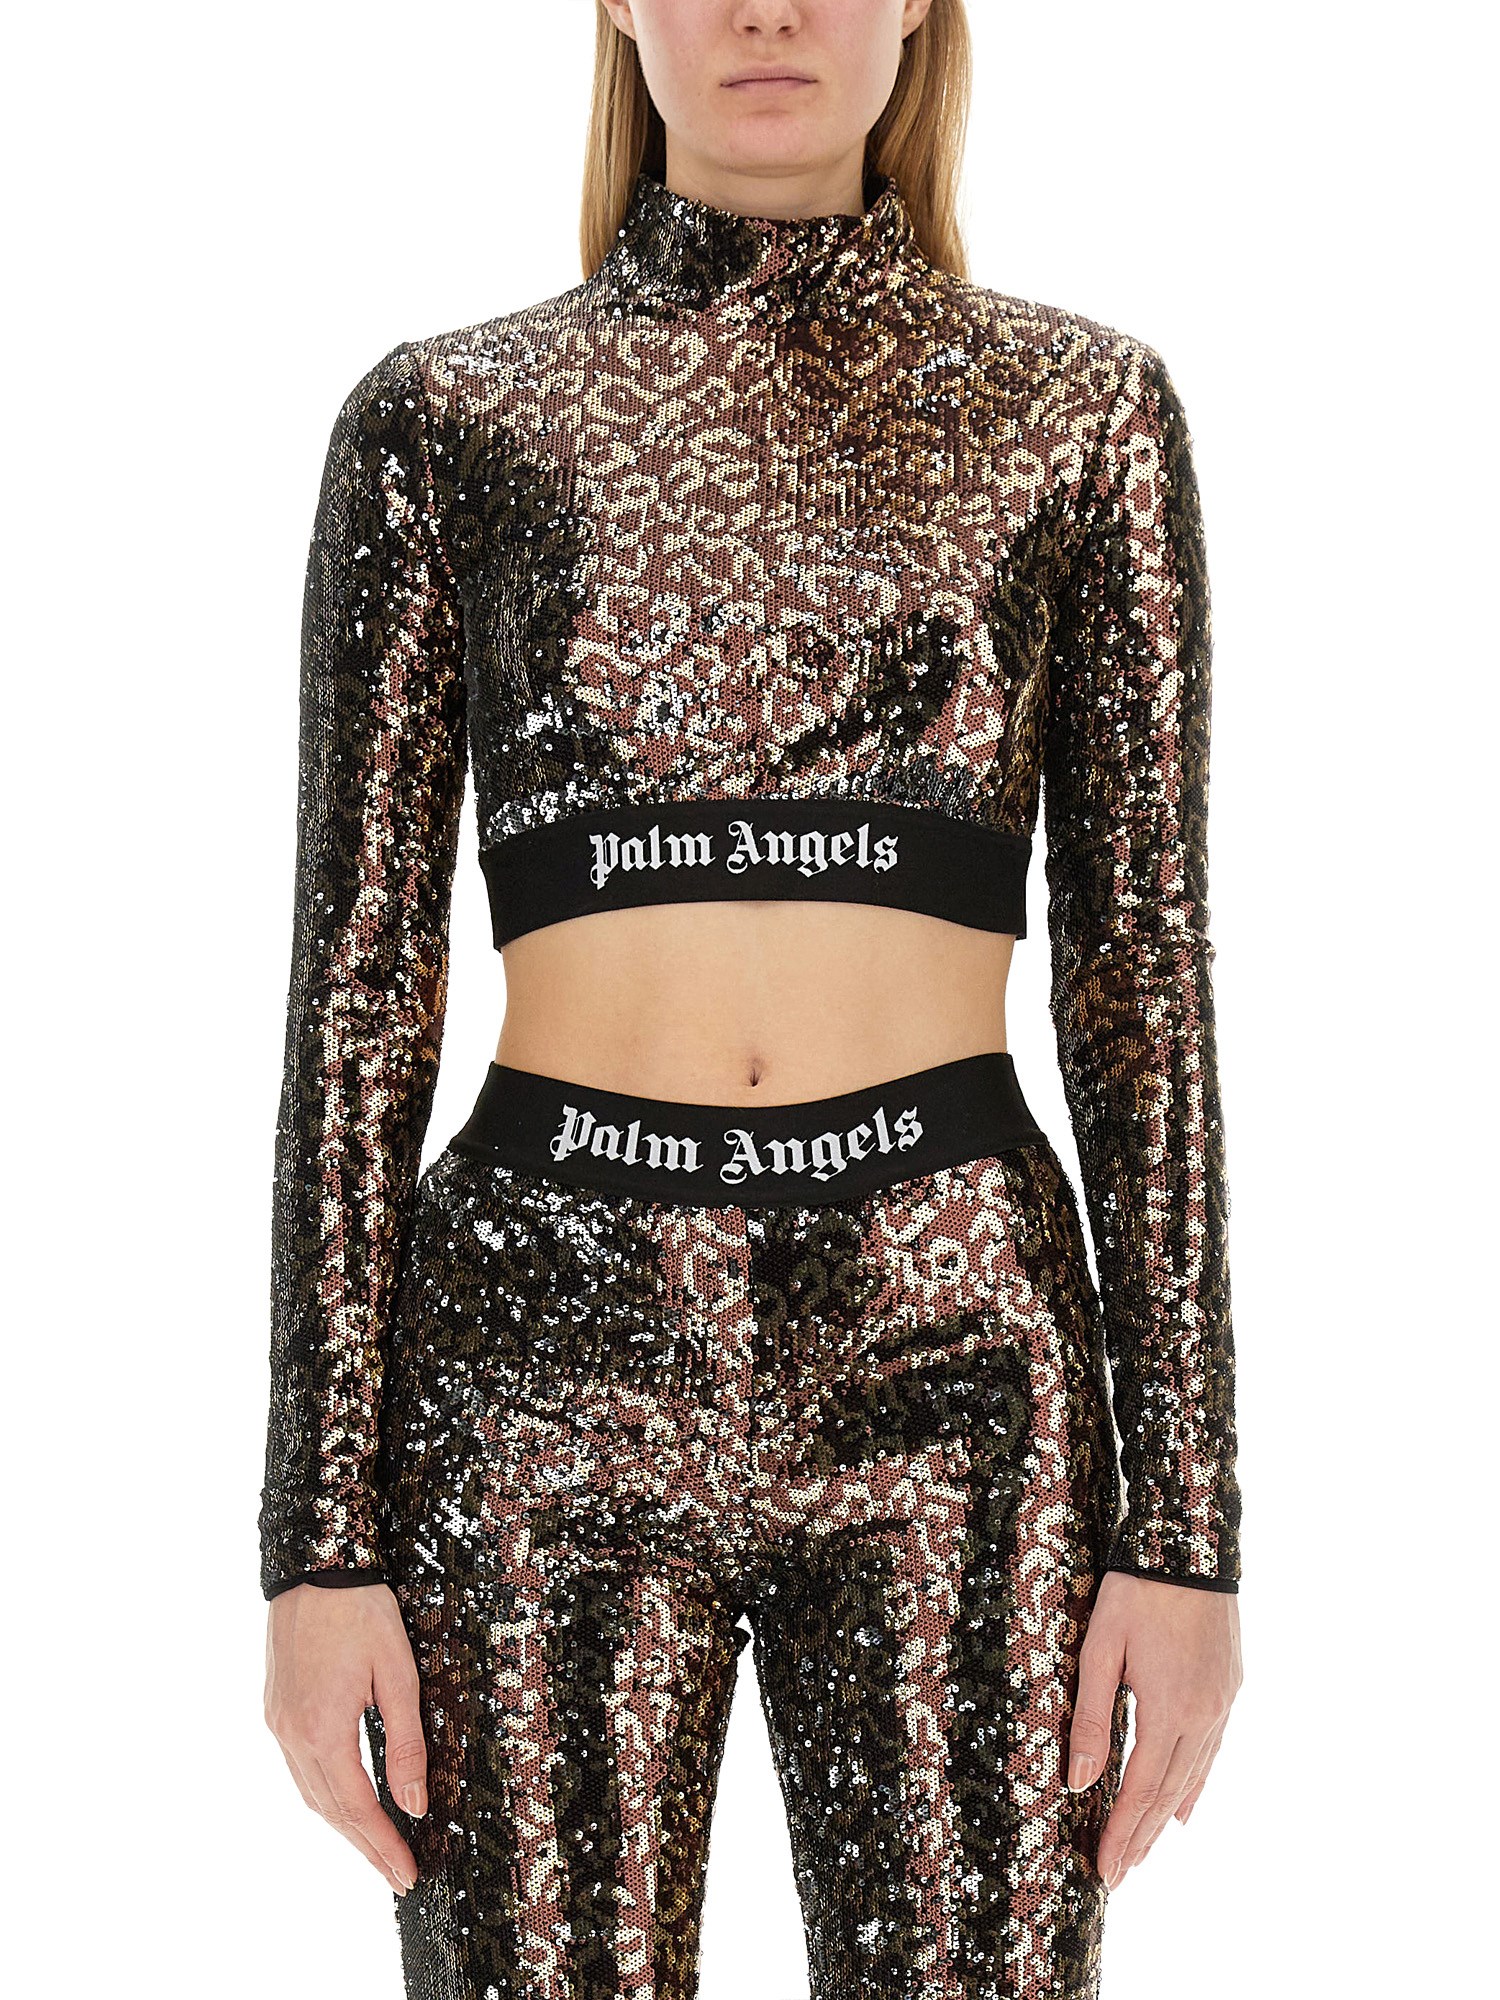 palm angels sequined top